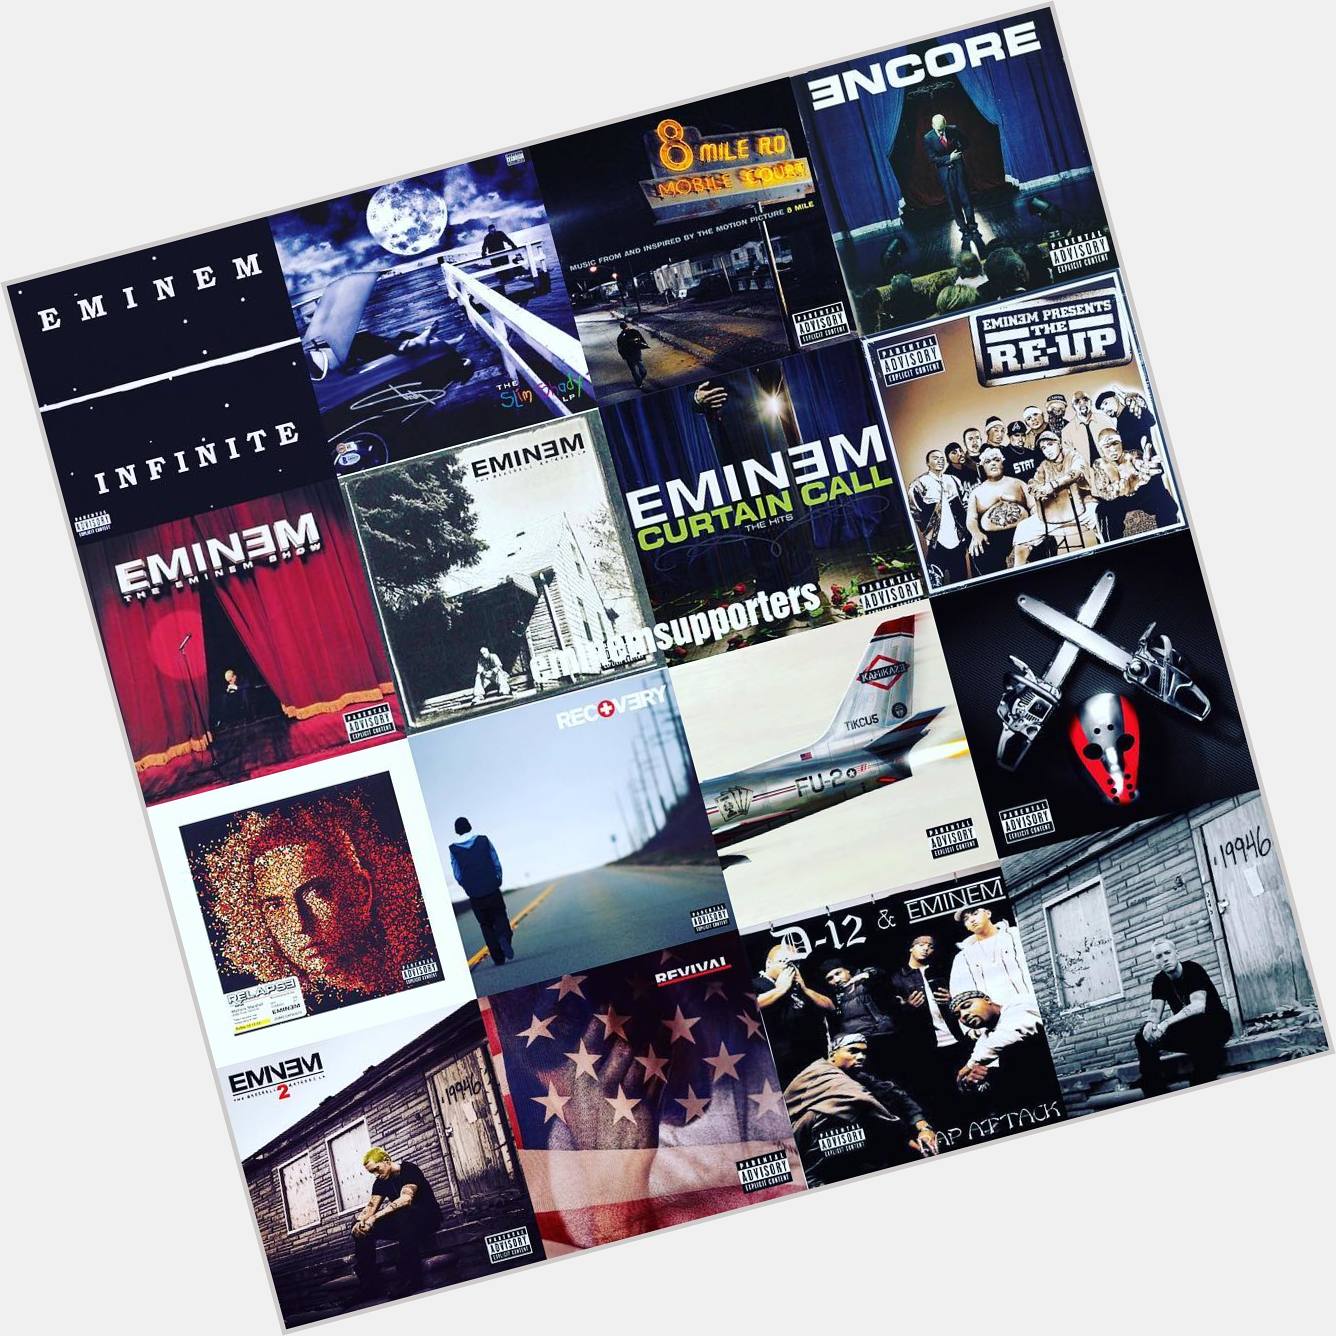 Happy 46th Birthday, Eminem  Every album has released since 2000 has debuted at the top of the charts 